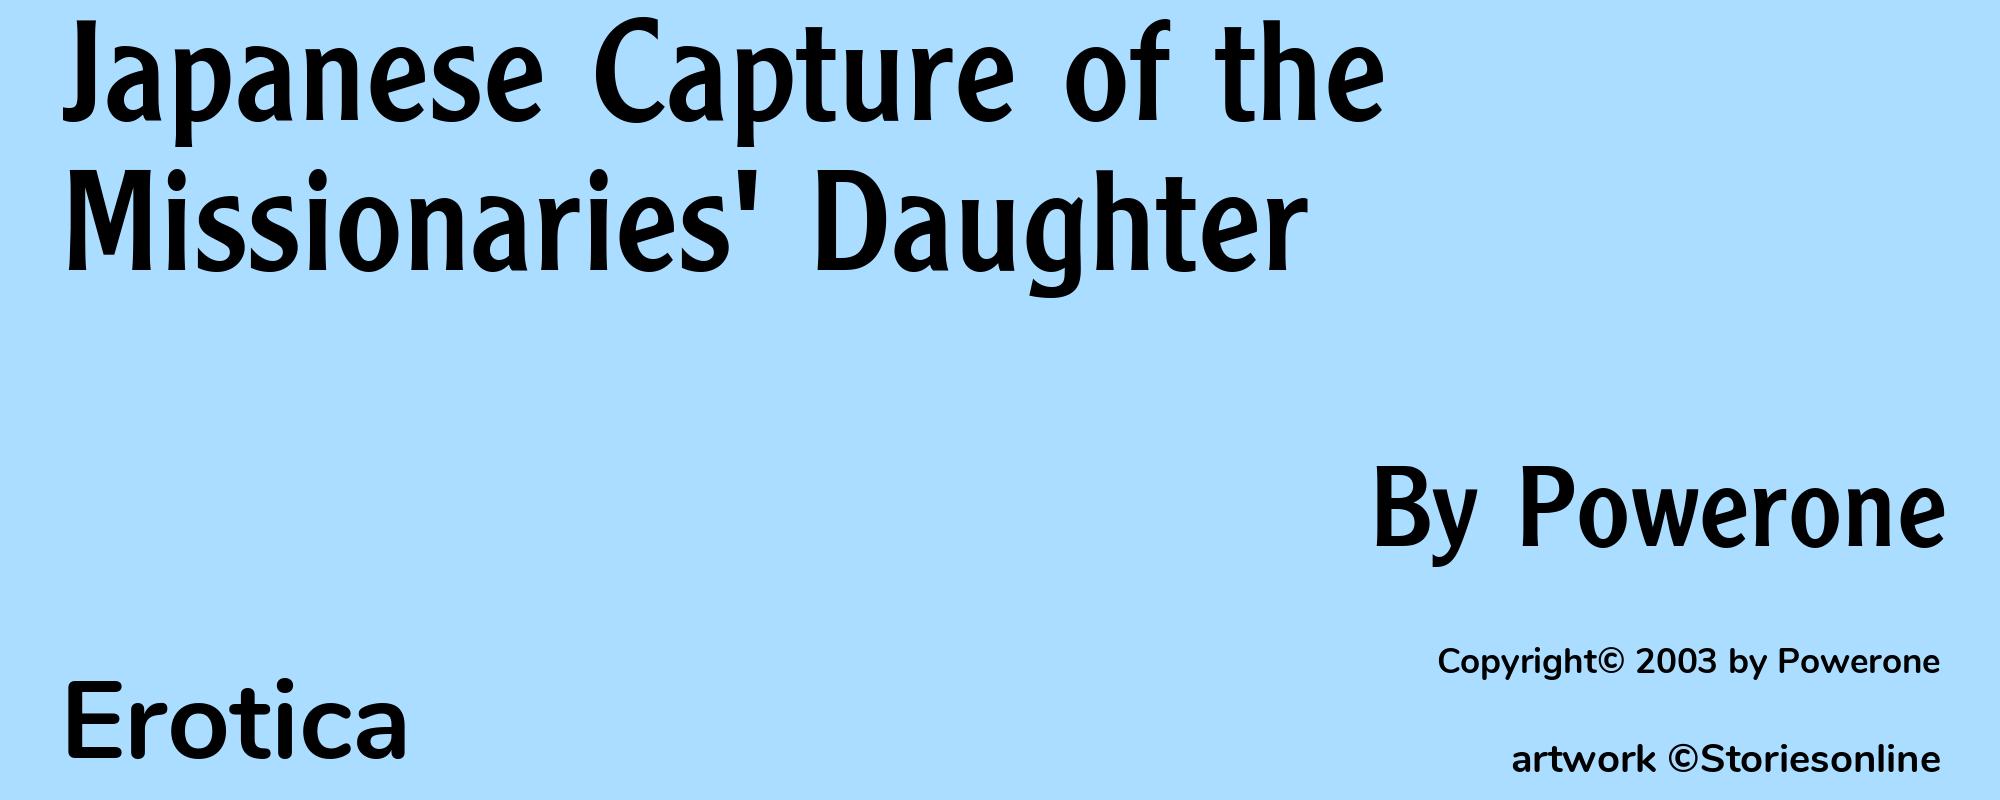 Japanese Capture of the Missionaries' Daughter - Cover